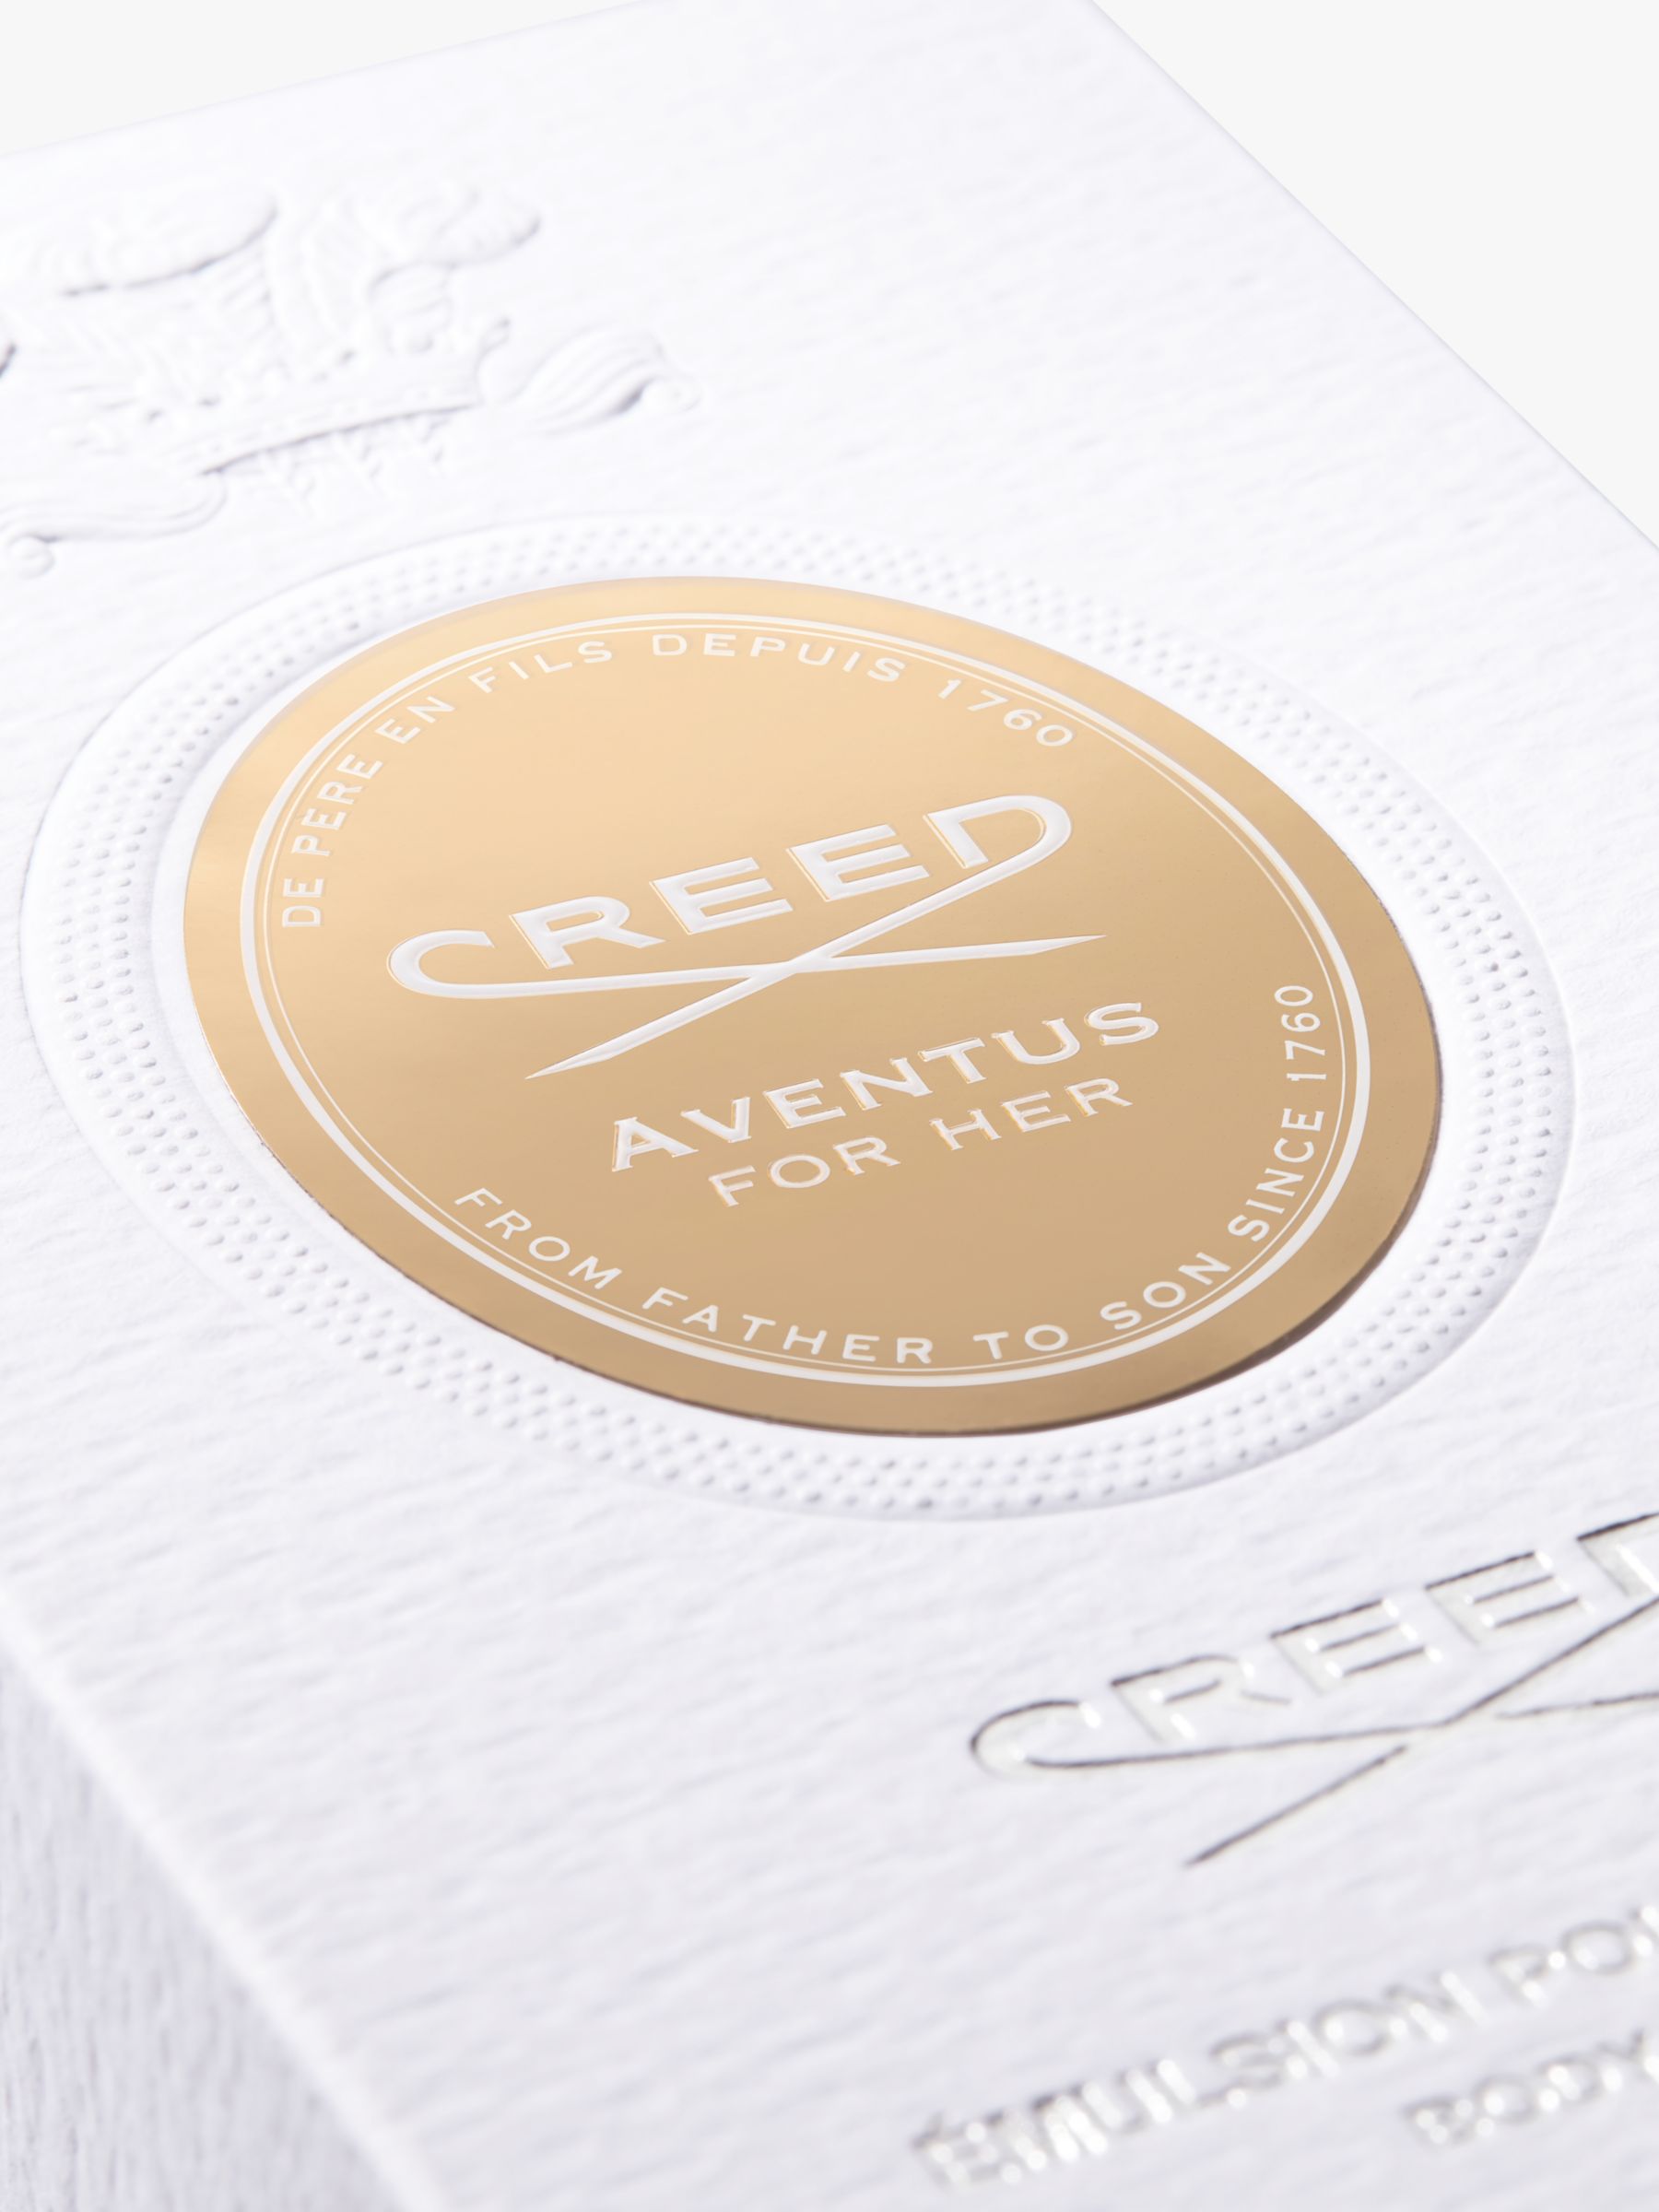 CREED Aventus For Her Body Lotion, 200ml 2